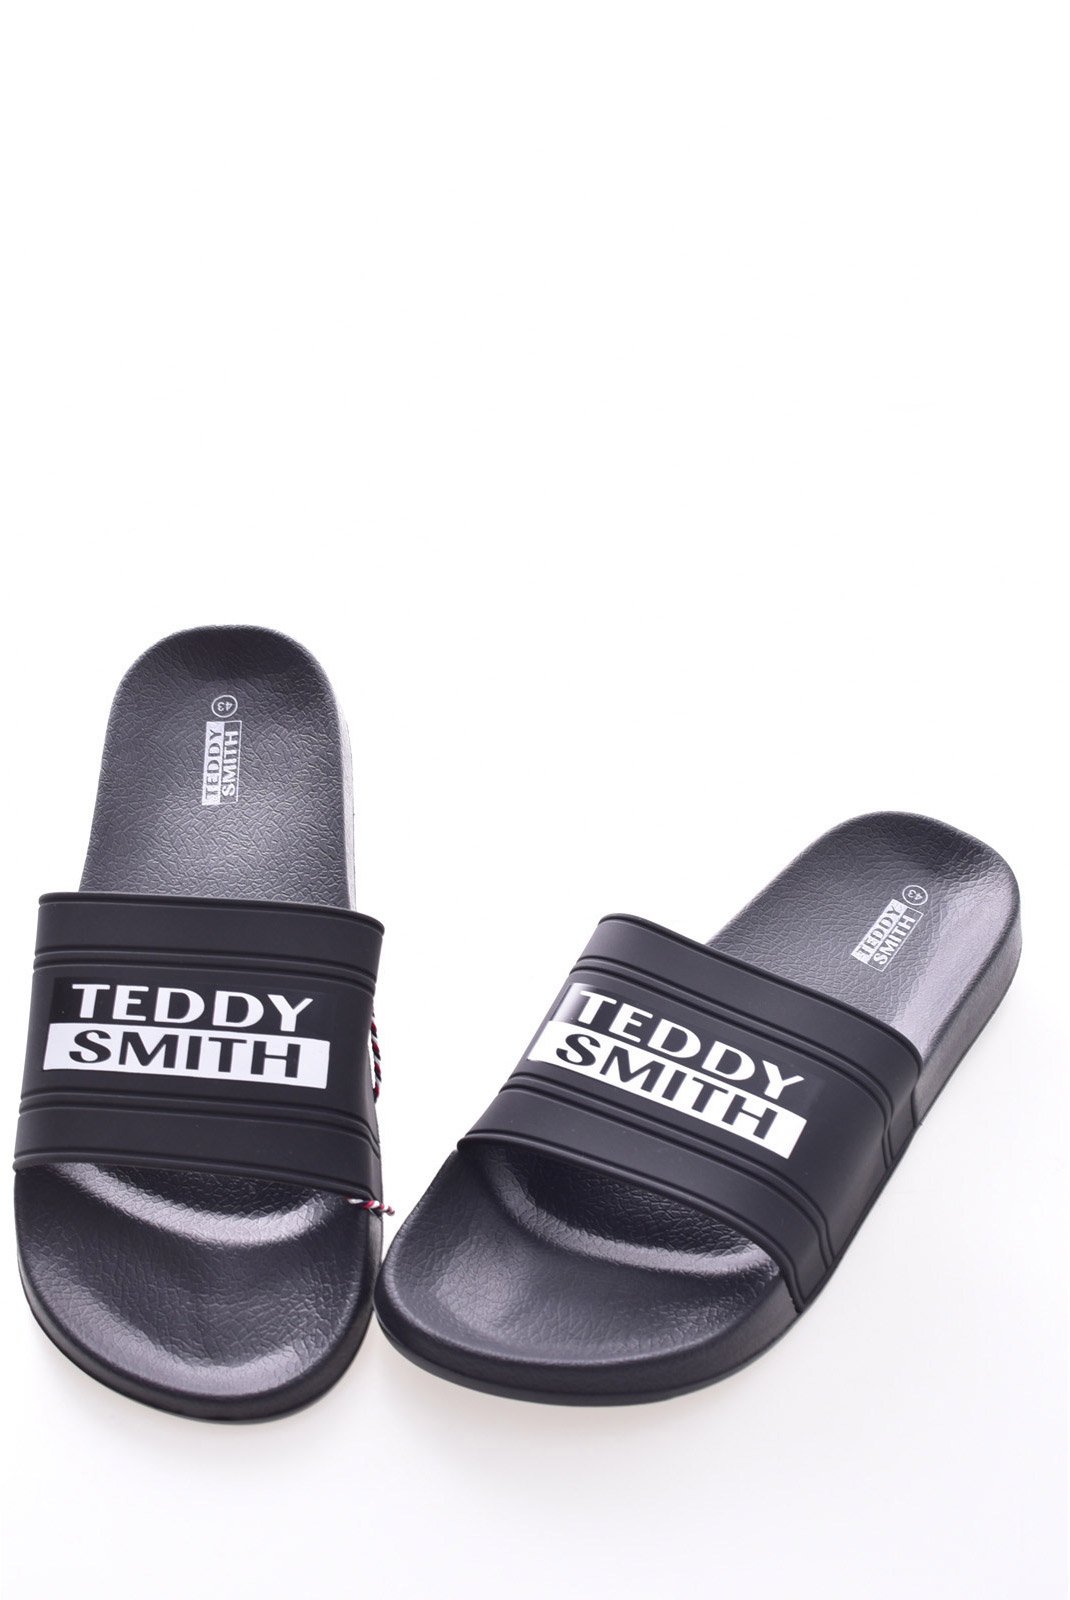 Chaussures   Teddy smith 71457 BLACK